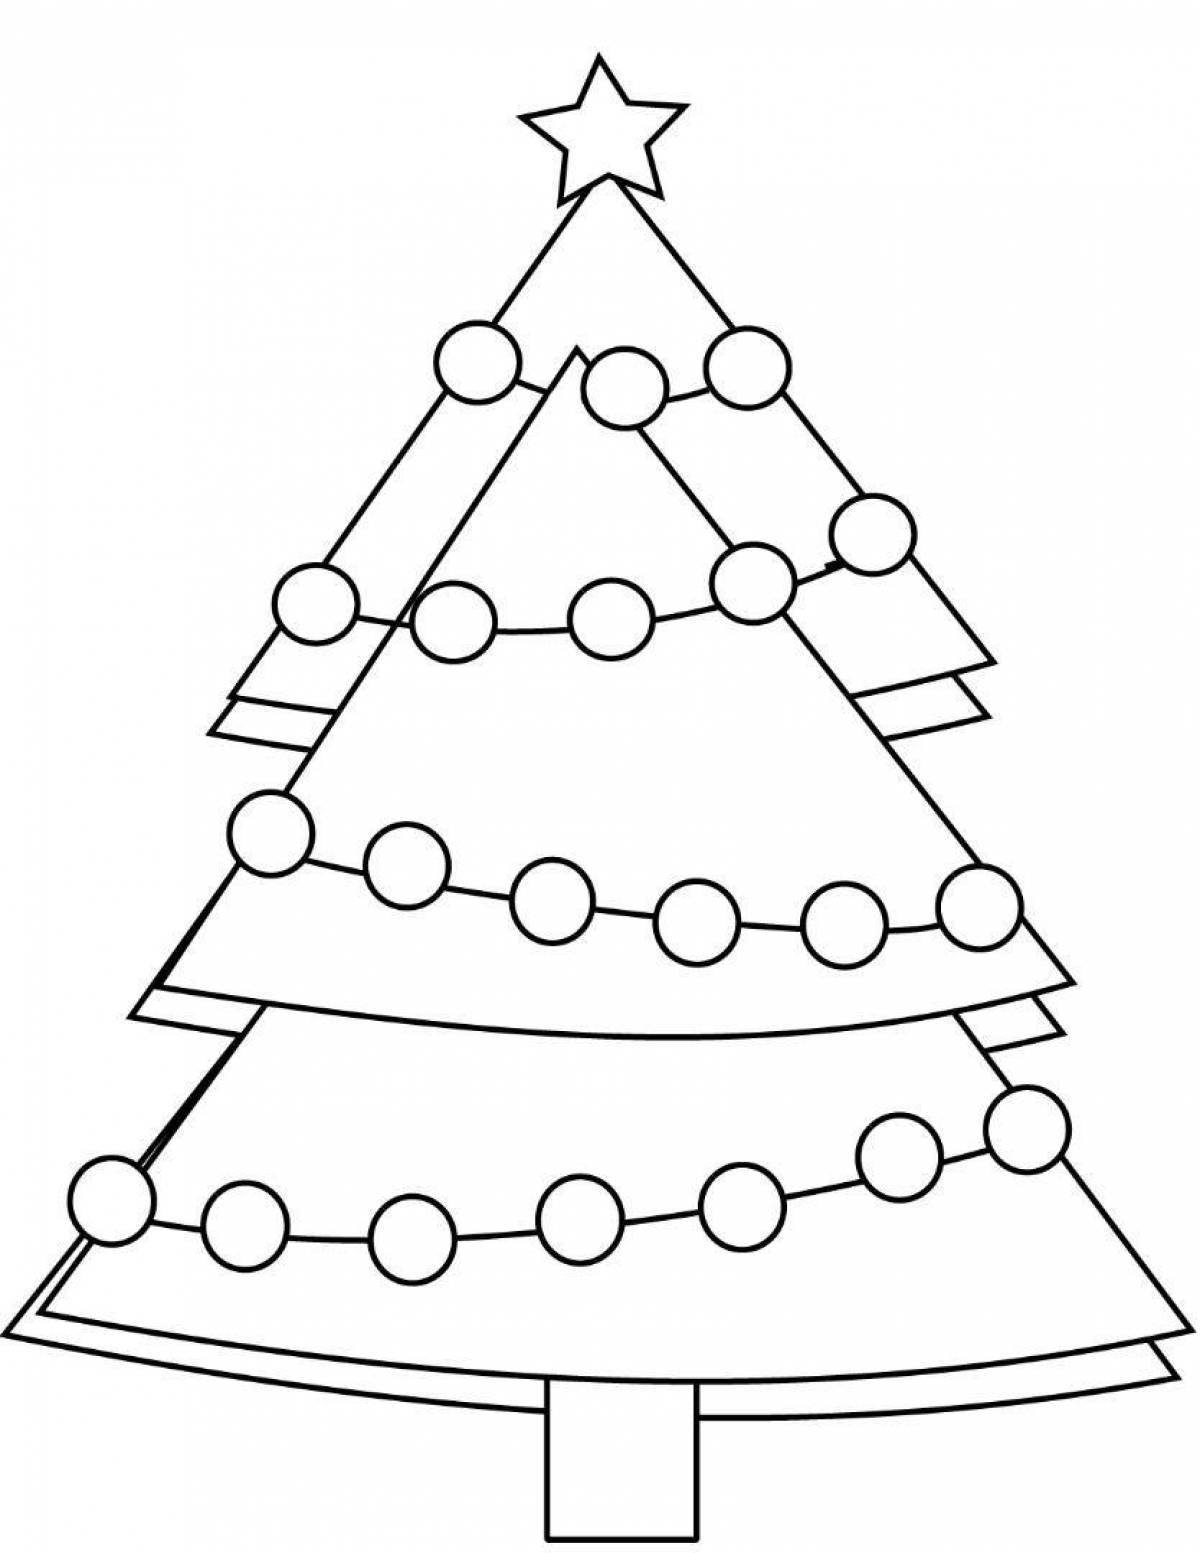 Christmas tree dazzling coloring book